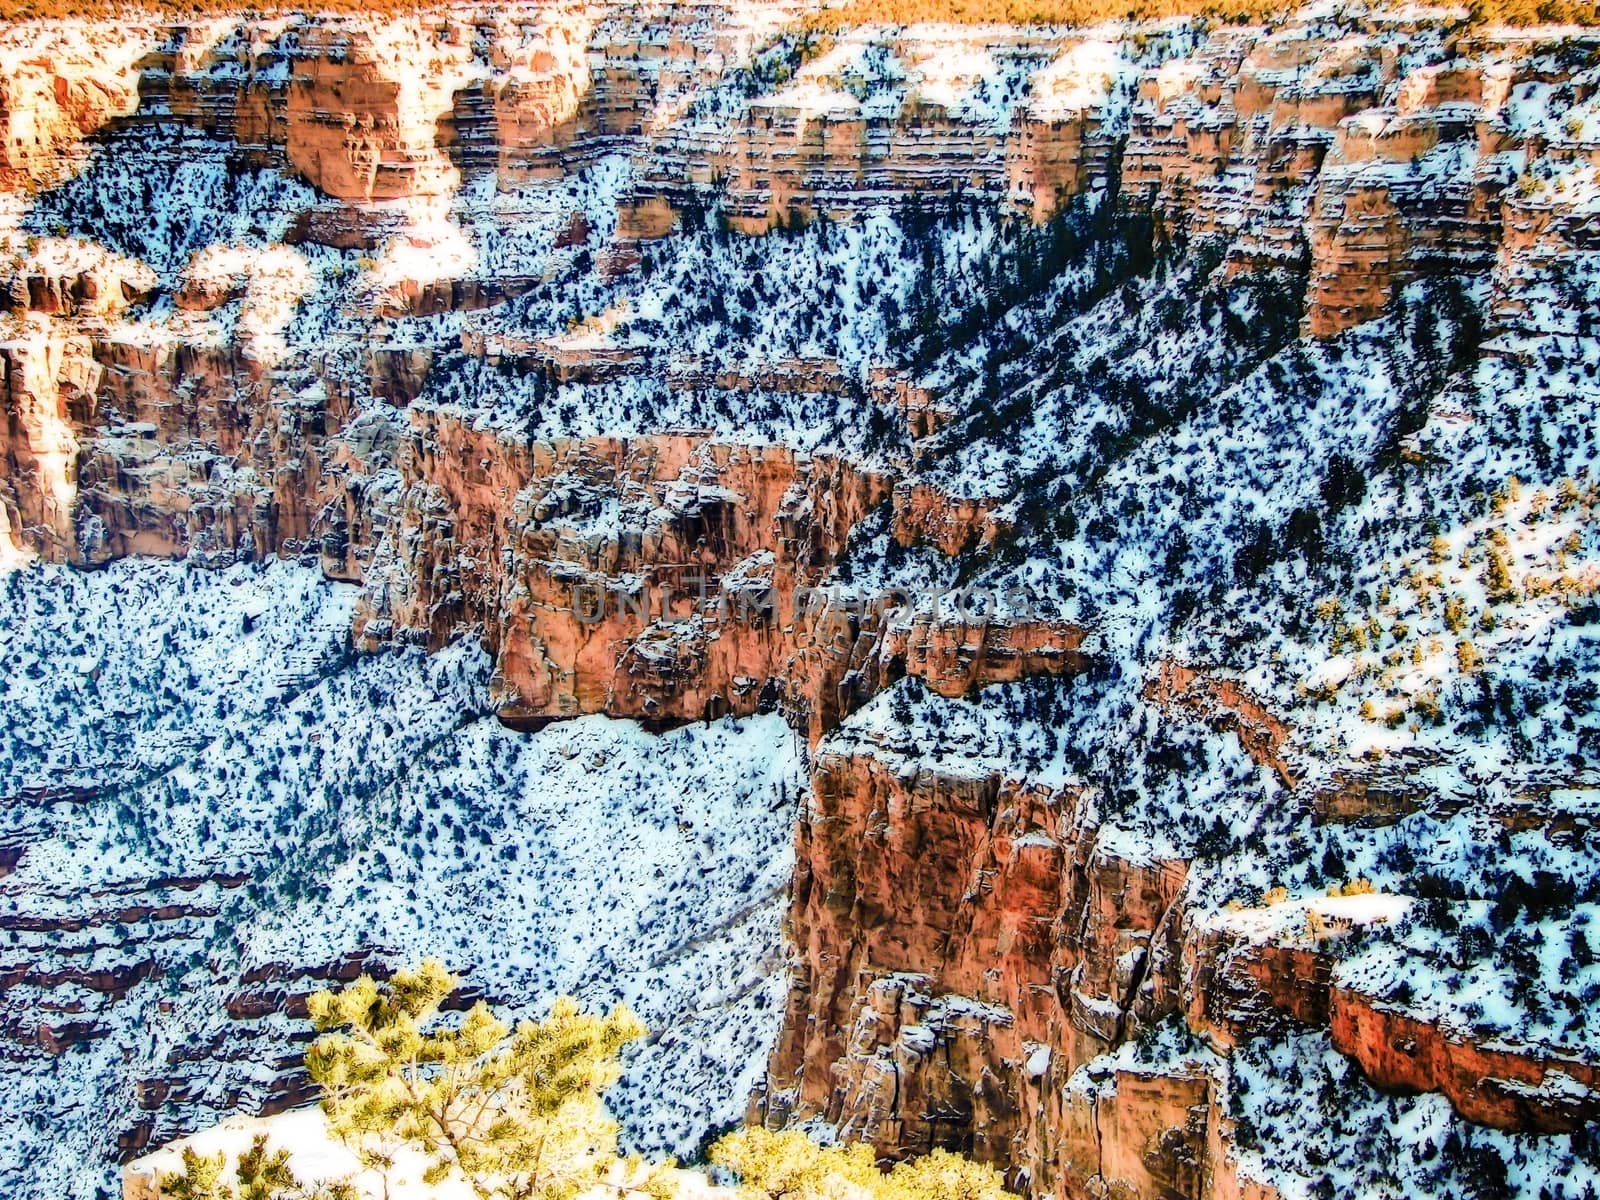 snow at Grand Canyon national park, USA in winter by Timmi